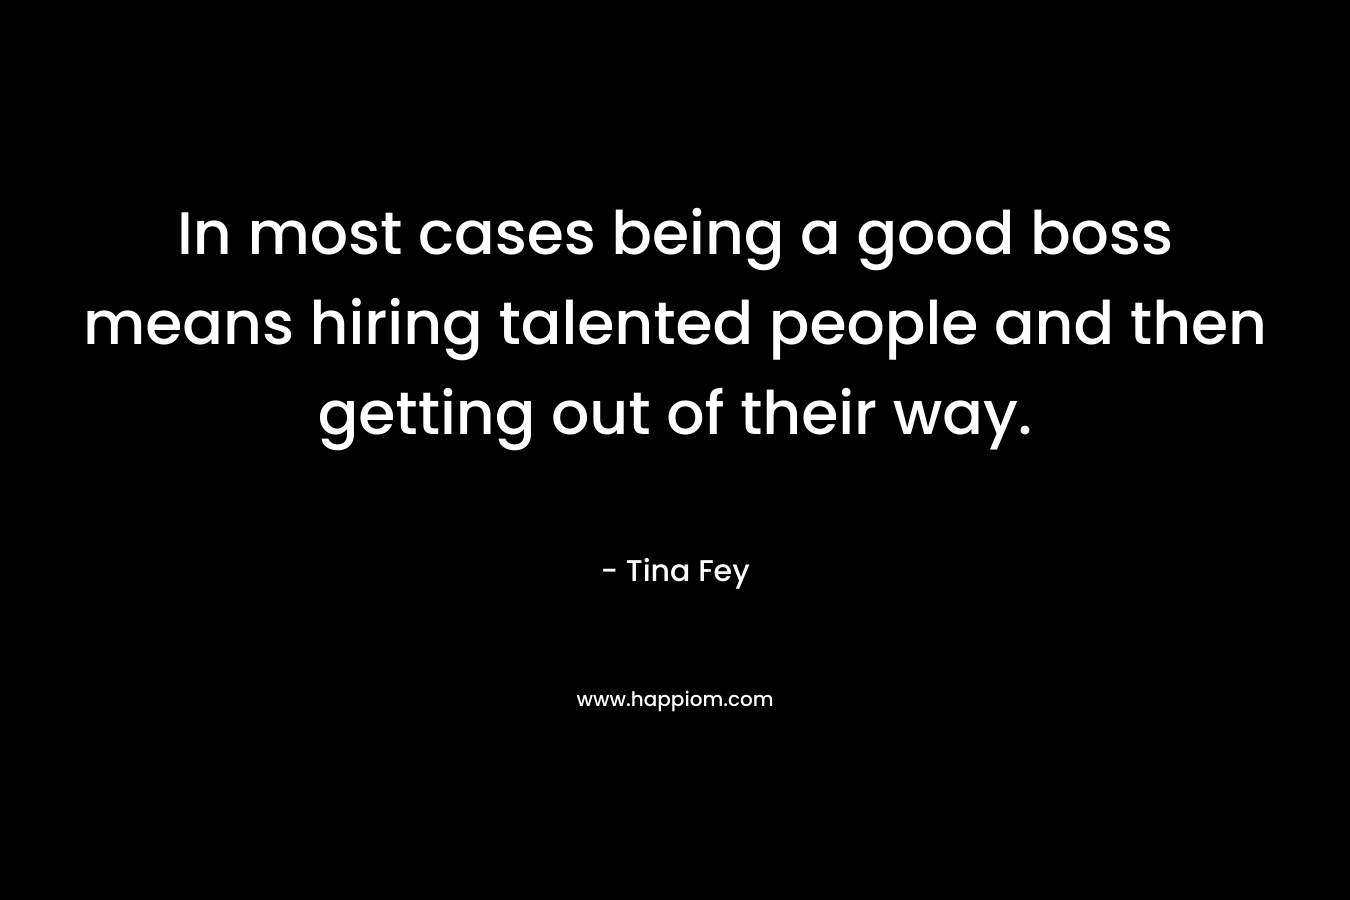 In most cases being a good boss means hiring talented people and then getting out of their way.